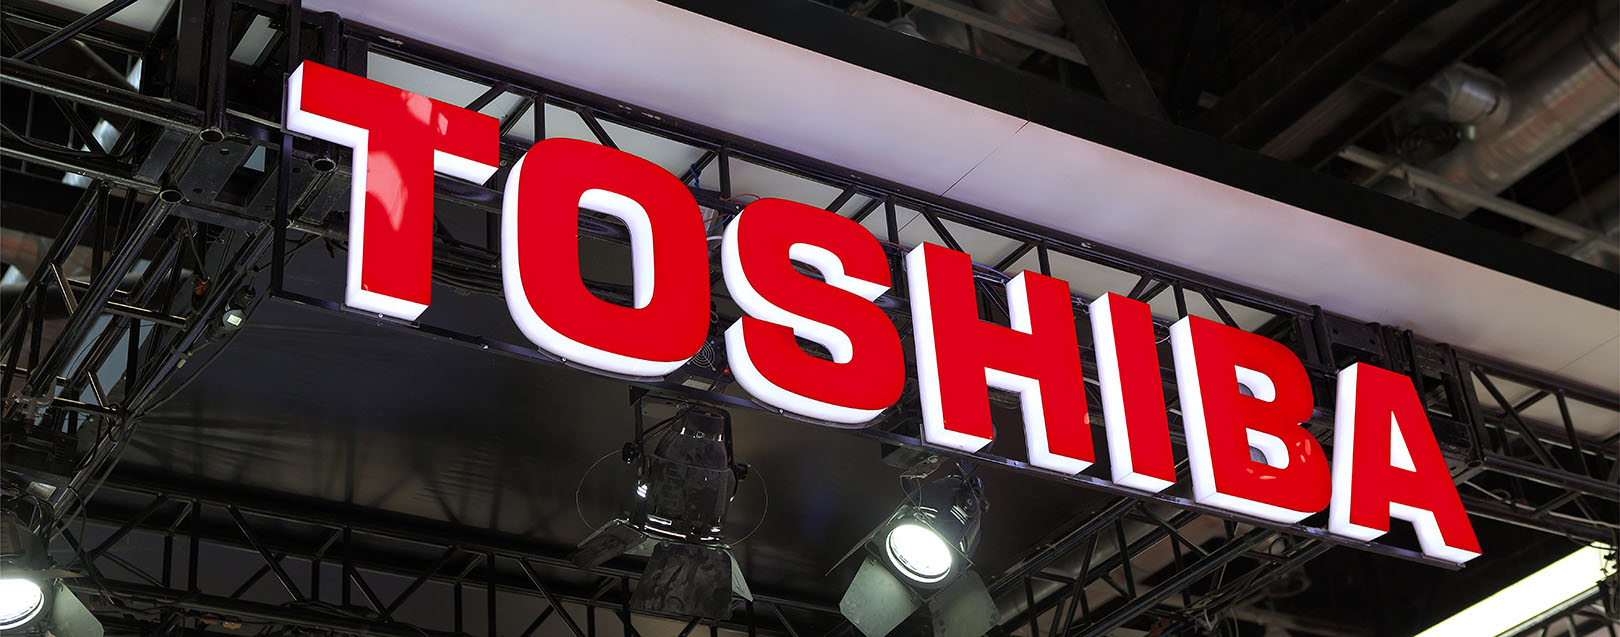 Writedown fears take off $5 bn of Toshiba's value